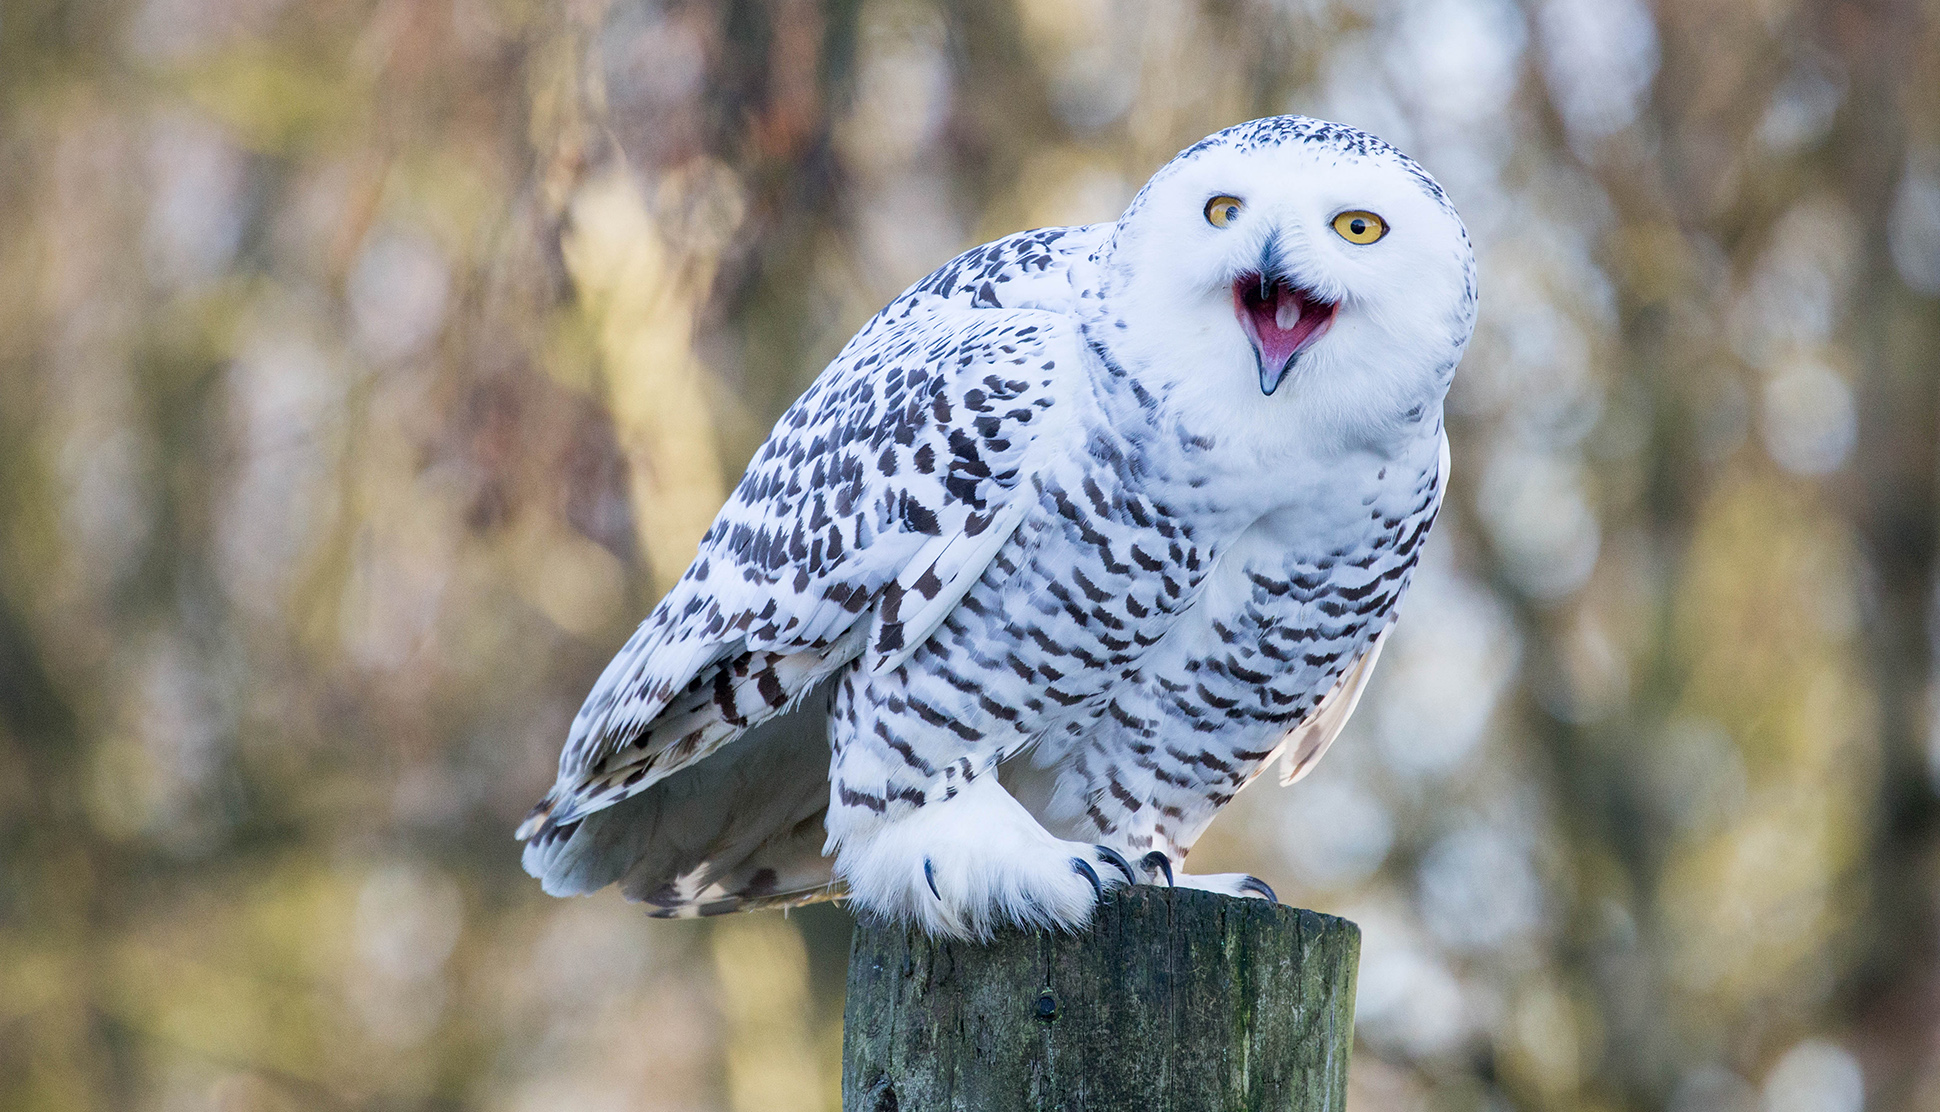 Changing seasons at the Hawk Conservancy Trust